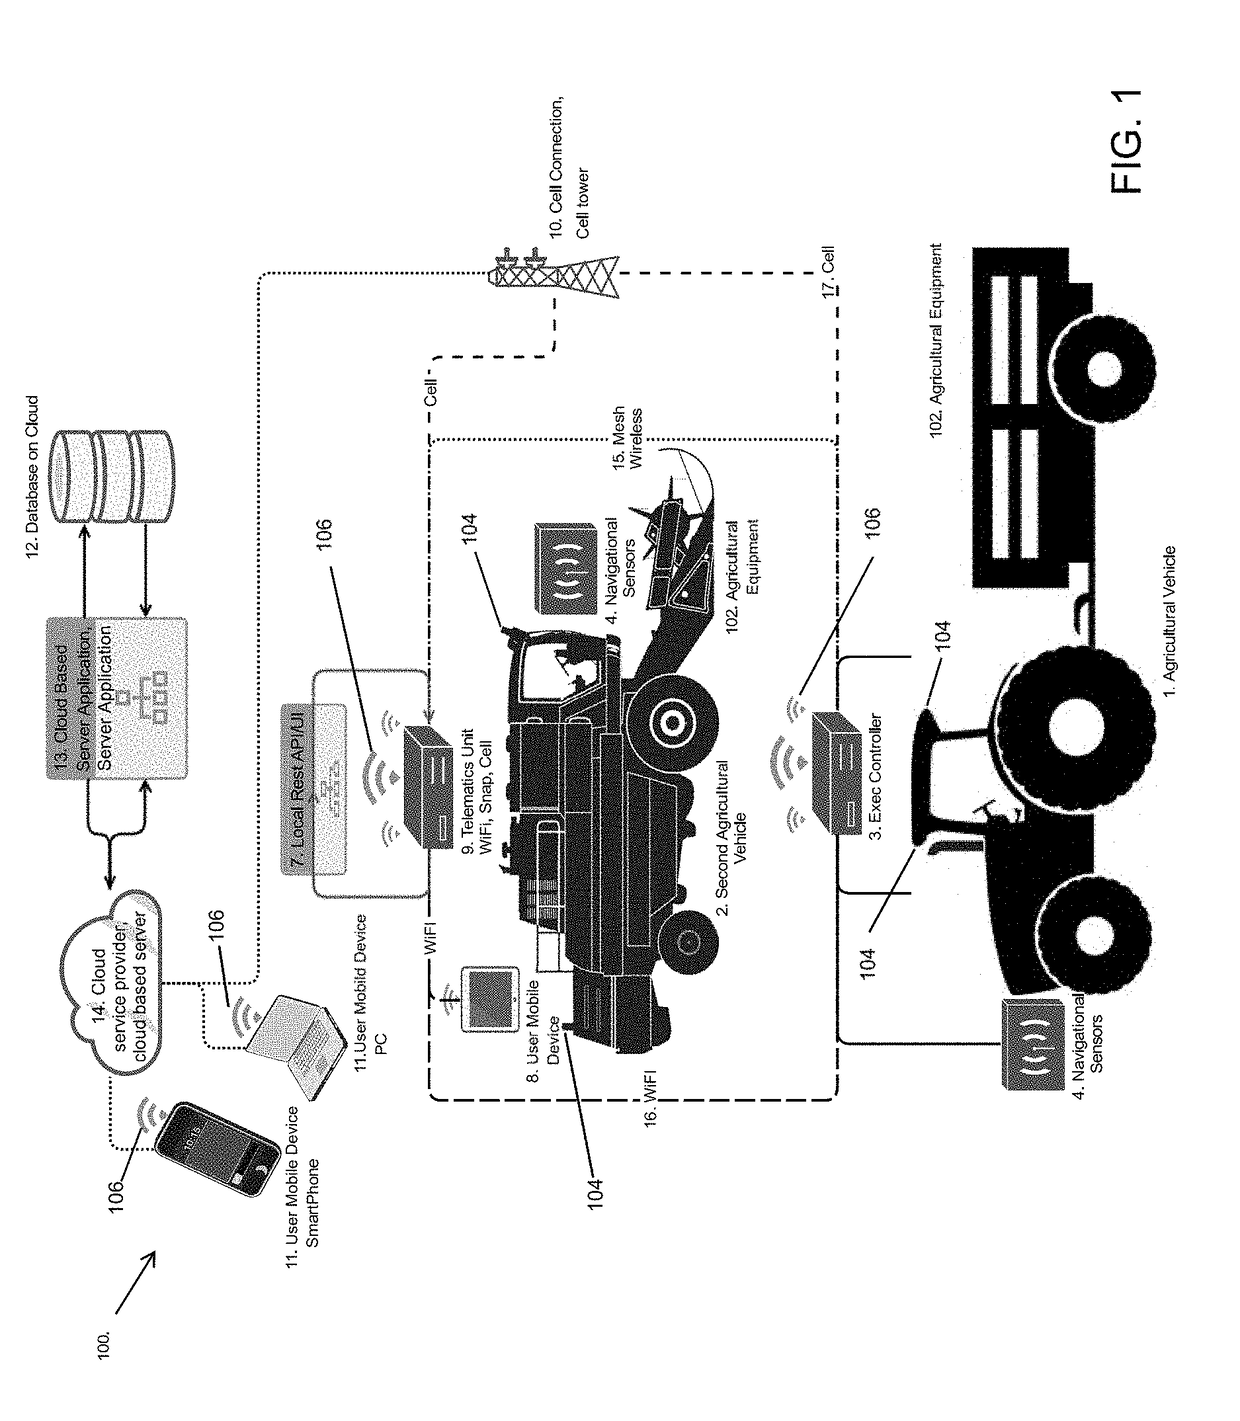 System and method for autonomous control of agricultural machinery and equipment